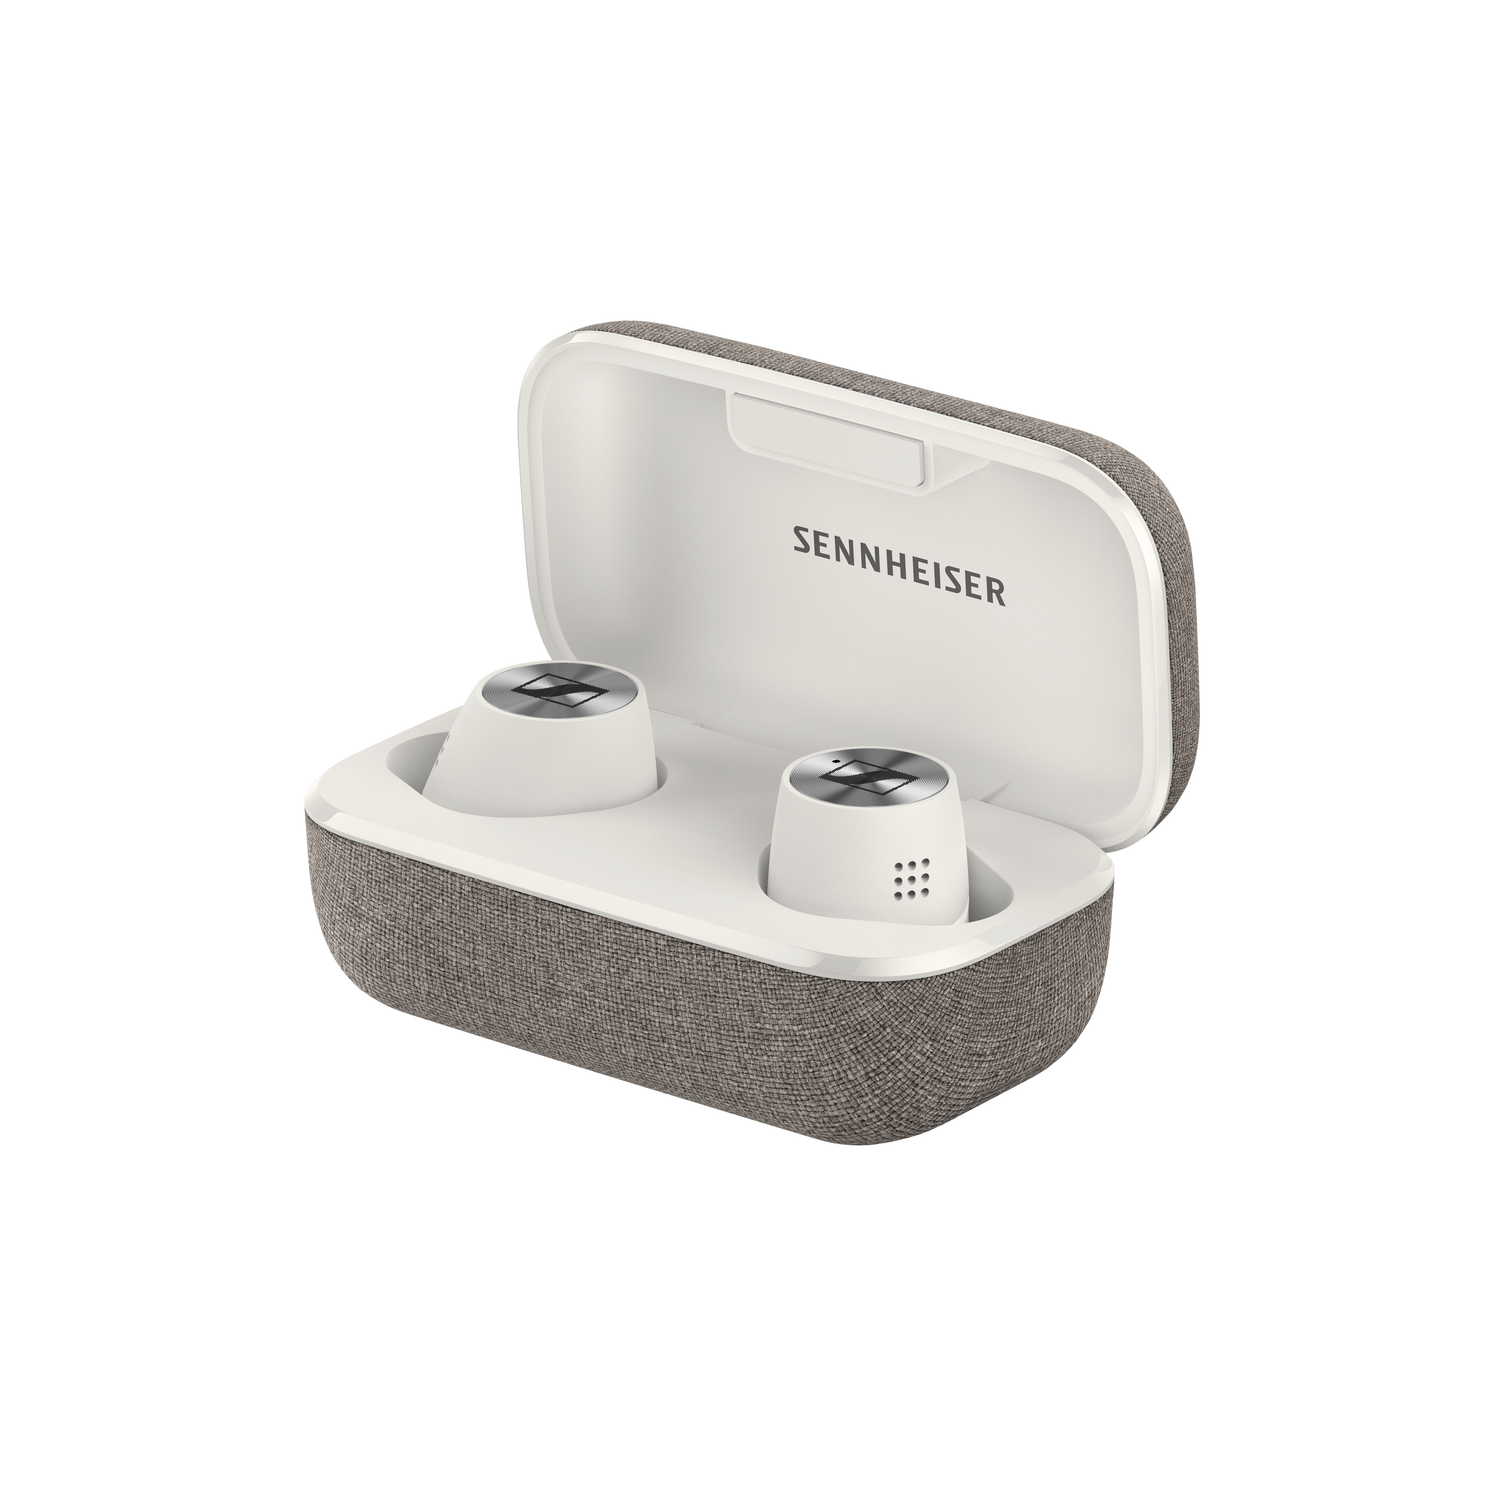 Refurbished (Excellent) - Sennheiser Momentum True Wireless 2 Bluetooth in-Ear Buds with Active Noise Cancellatio Smart Pause Customizable Touch Control and 28-Hour Battery Life